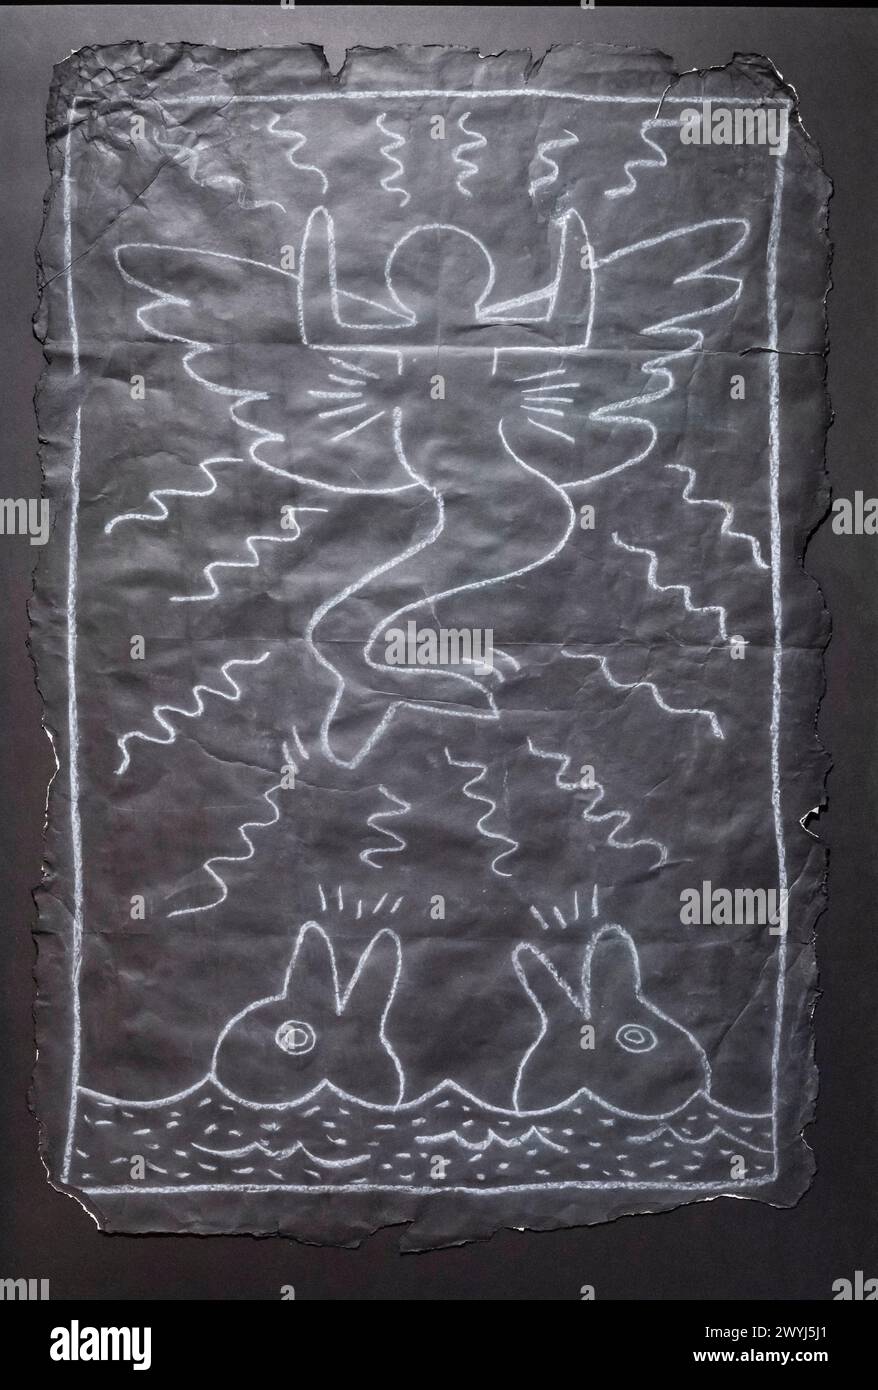 Keith Haring, sans titre, Winged Mermaid and Dolphins, Subway Drawing, circa 1983, craie blanche sur papier noir, Musée Moco, Amsterdam, pays-Bas Banque D'Images